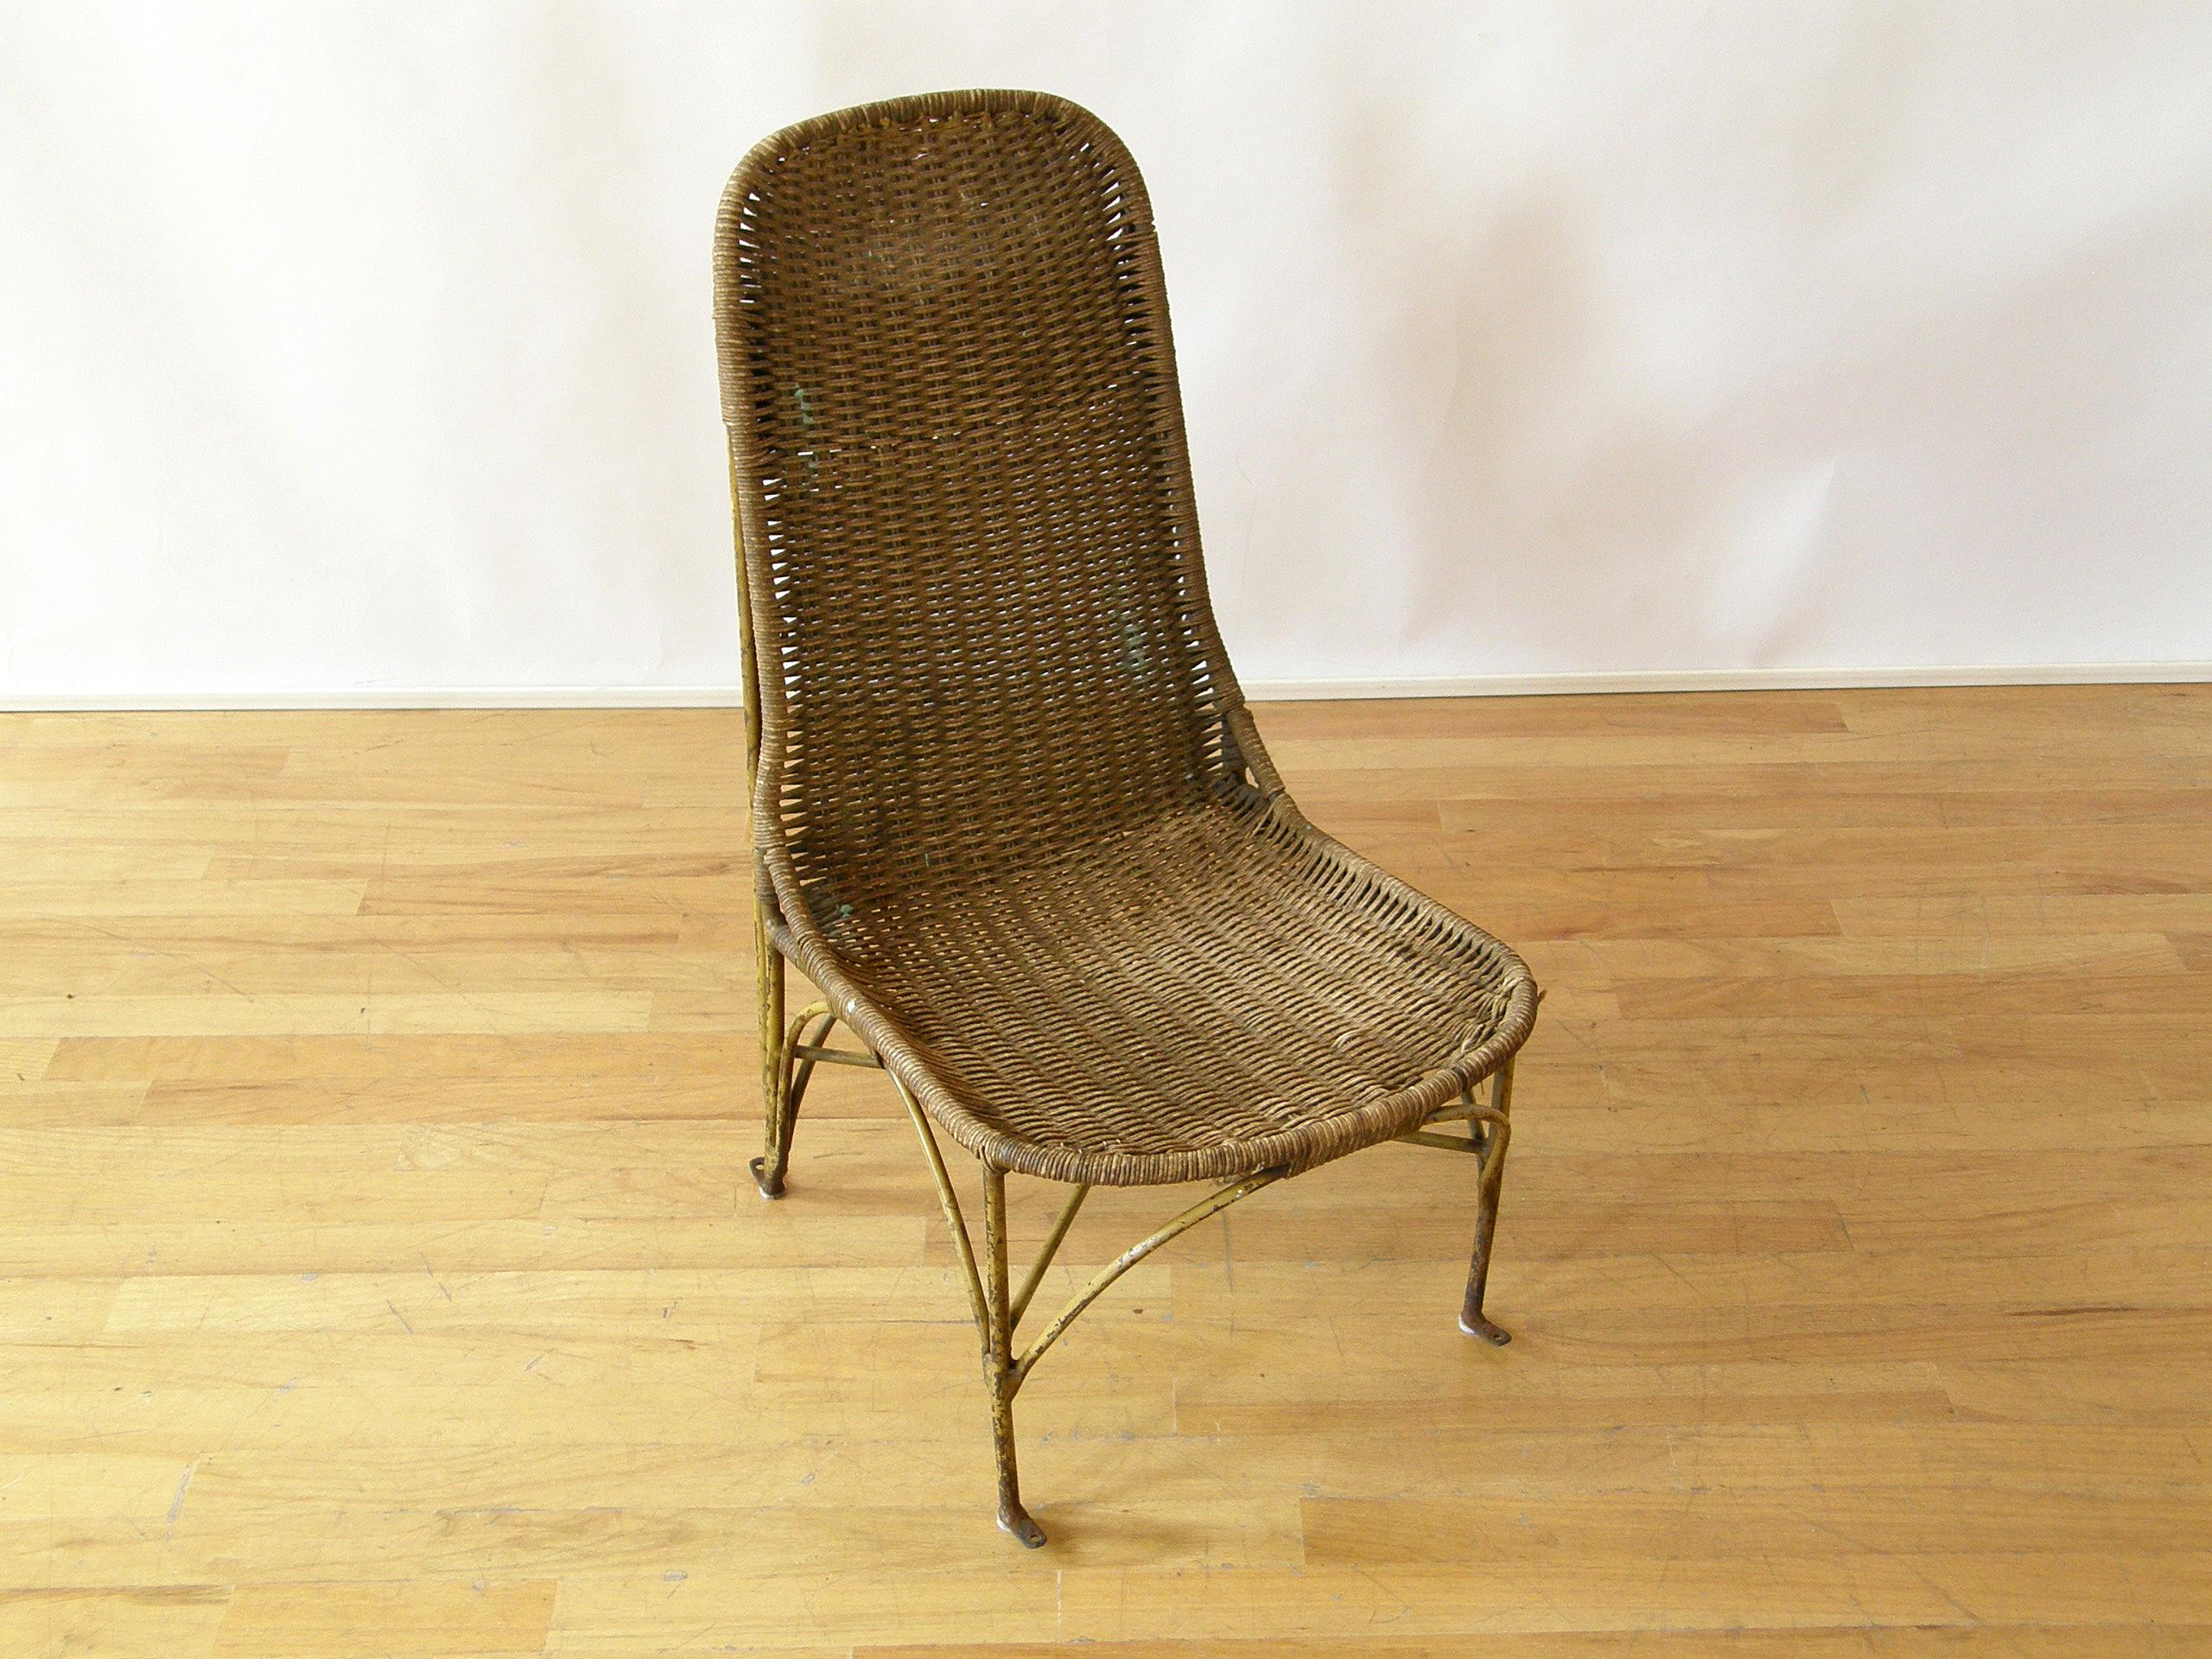 This pilot's or passenger's seat from a circa 1920s airplane is an excellent example of early 20th century industrial design. The frame is made from rod iron, and the seat and back are woven rush. The rear of the seat back has a cleverly integrated